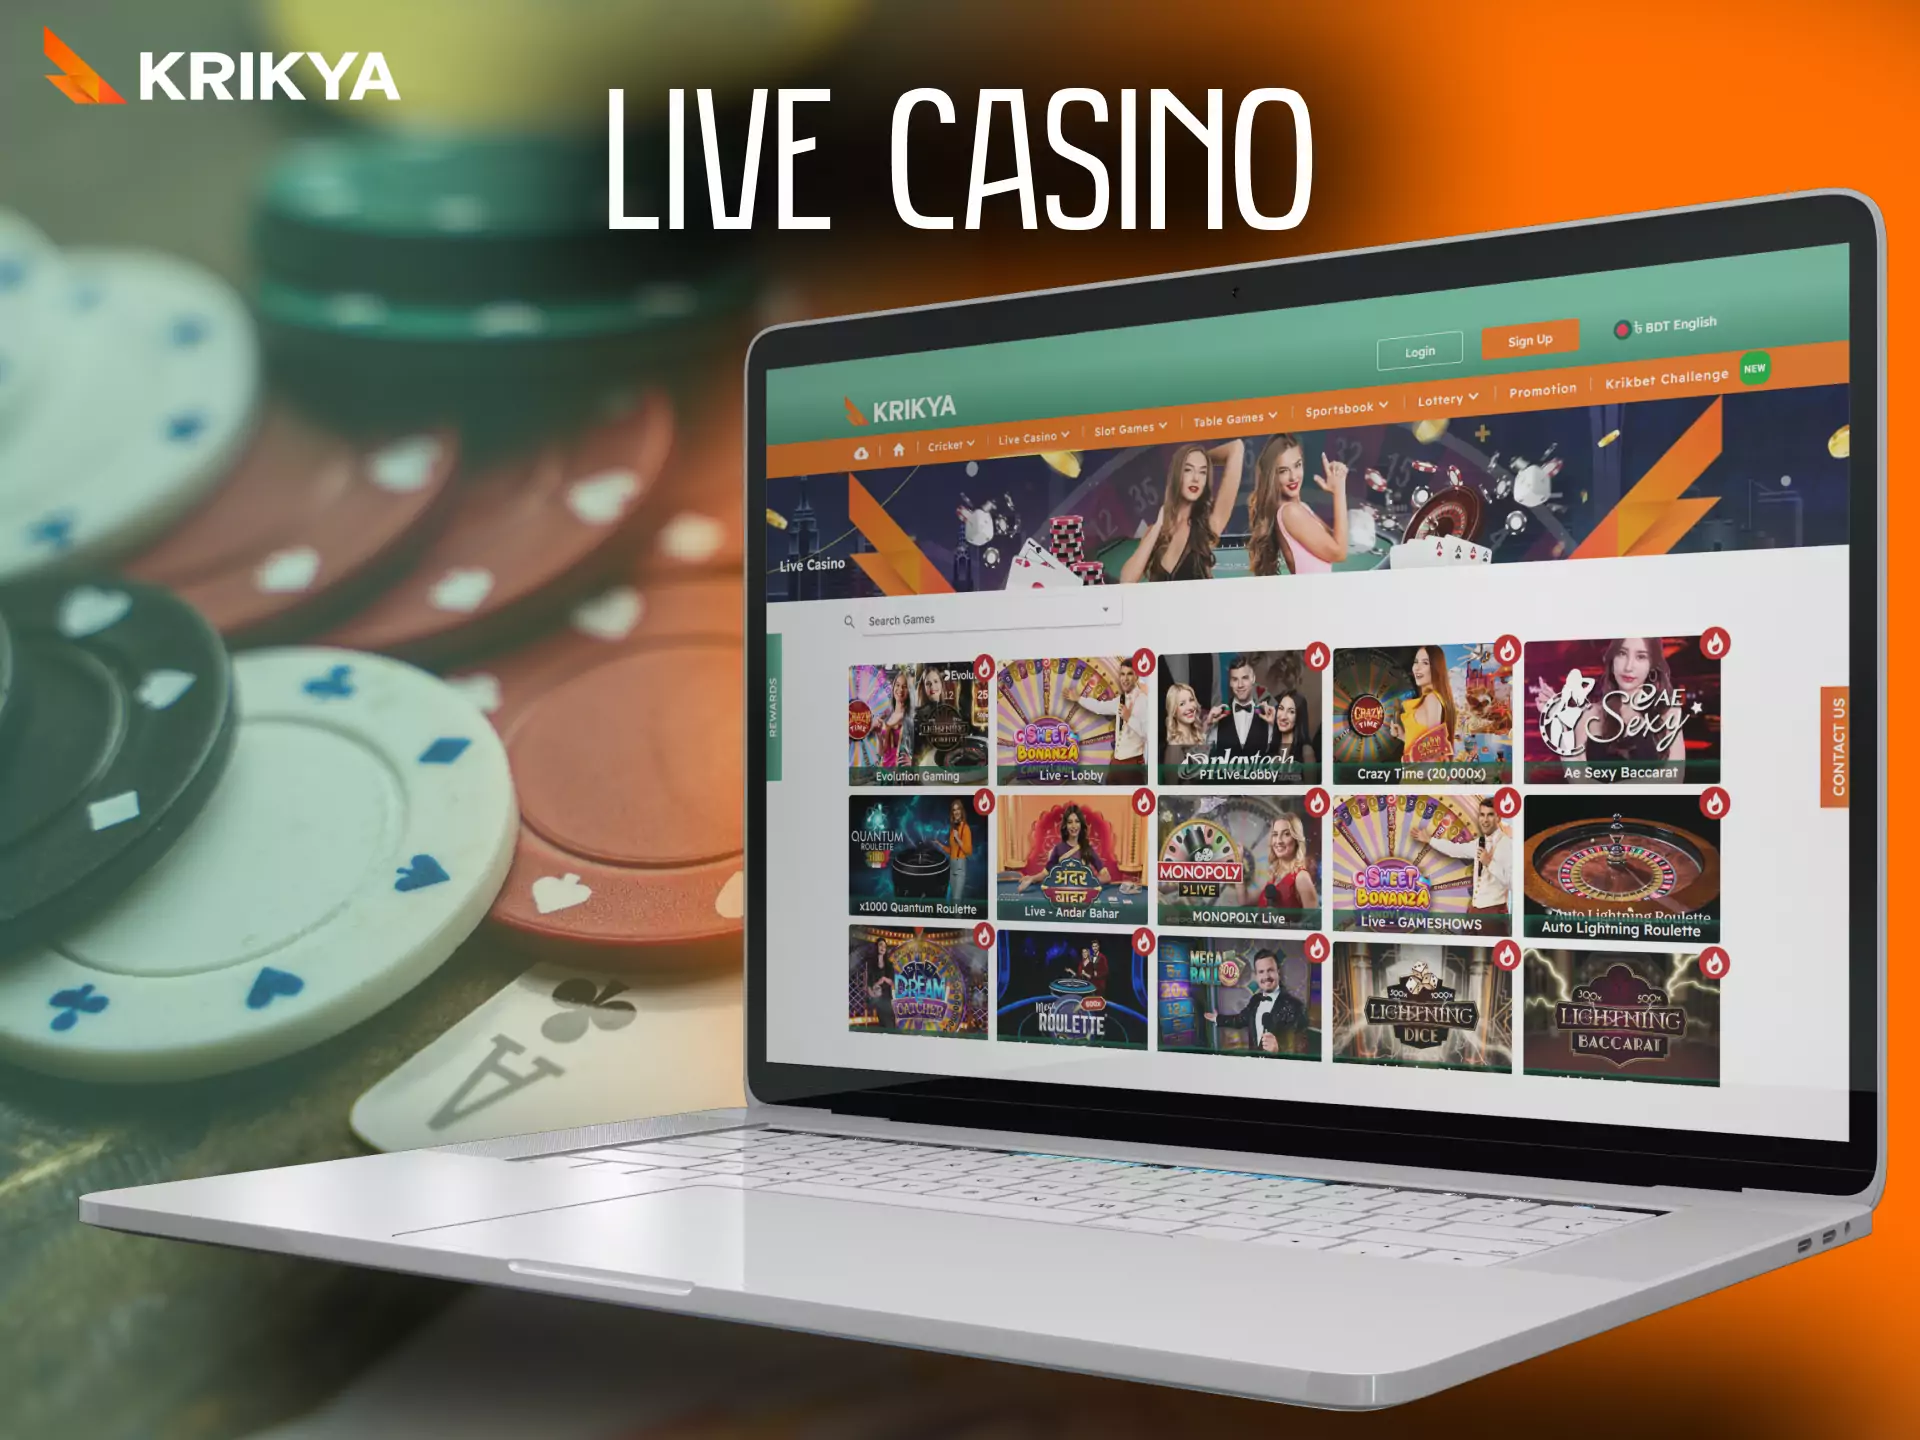 On Krikya, play your favorite games with dealers in live casino.